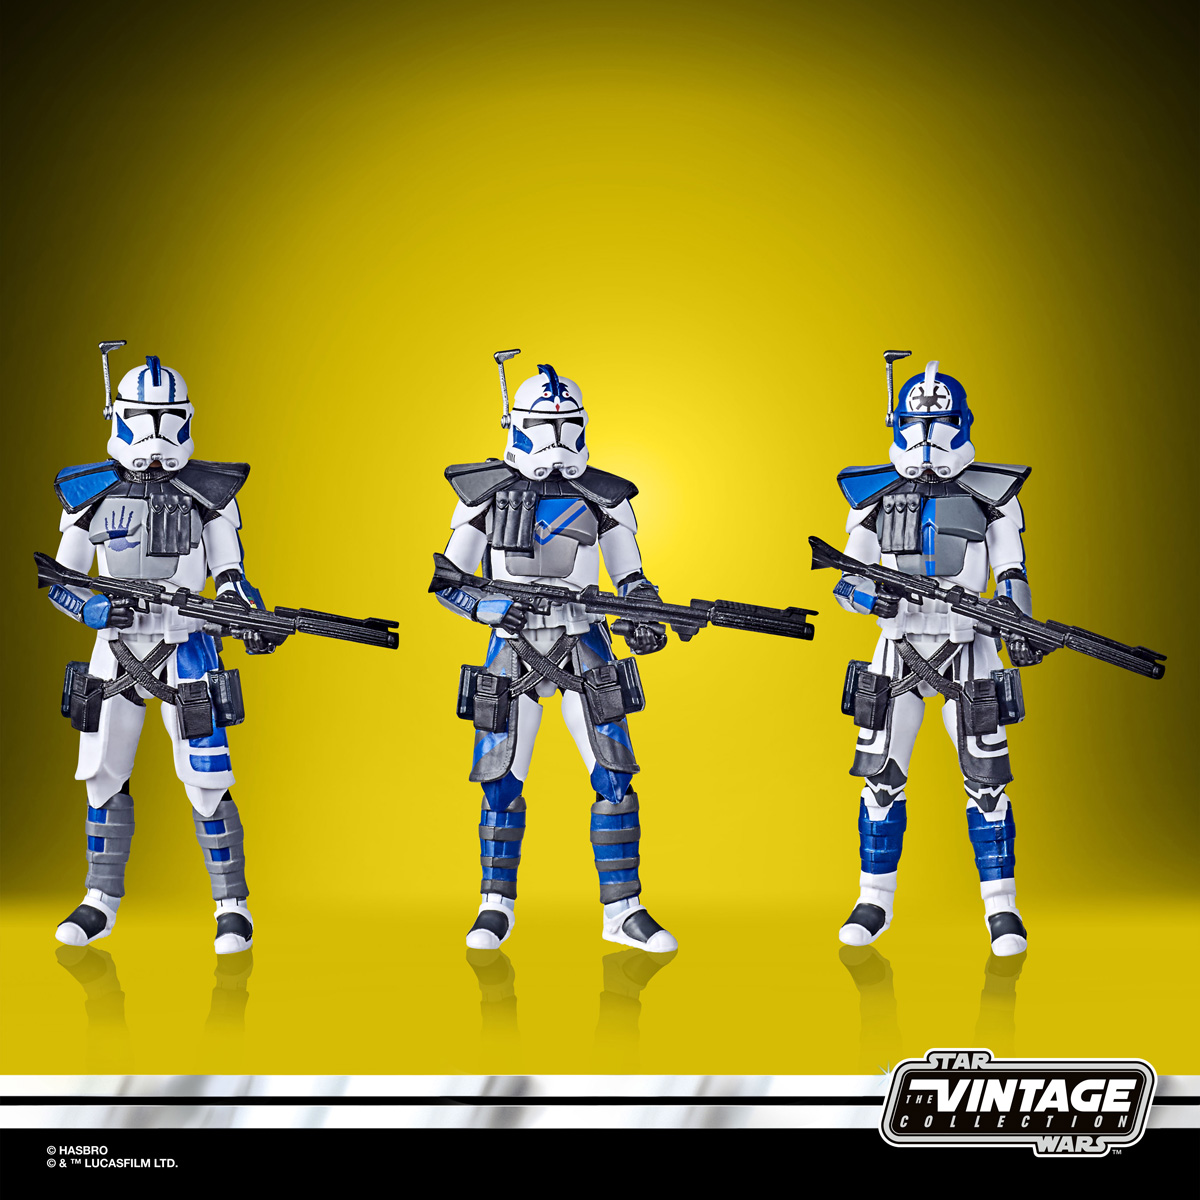 Star Wars The Vintage Collection Star Wars The Clone Wars 501st Legion Arc Troopers Figure 3 Pack Oop 1